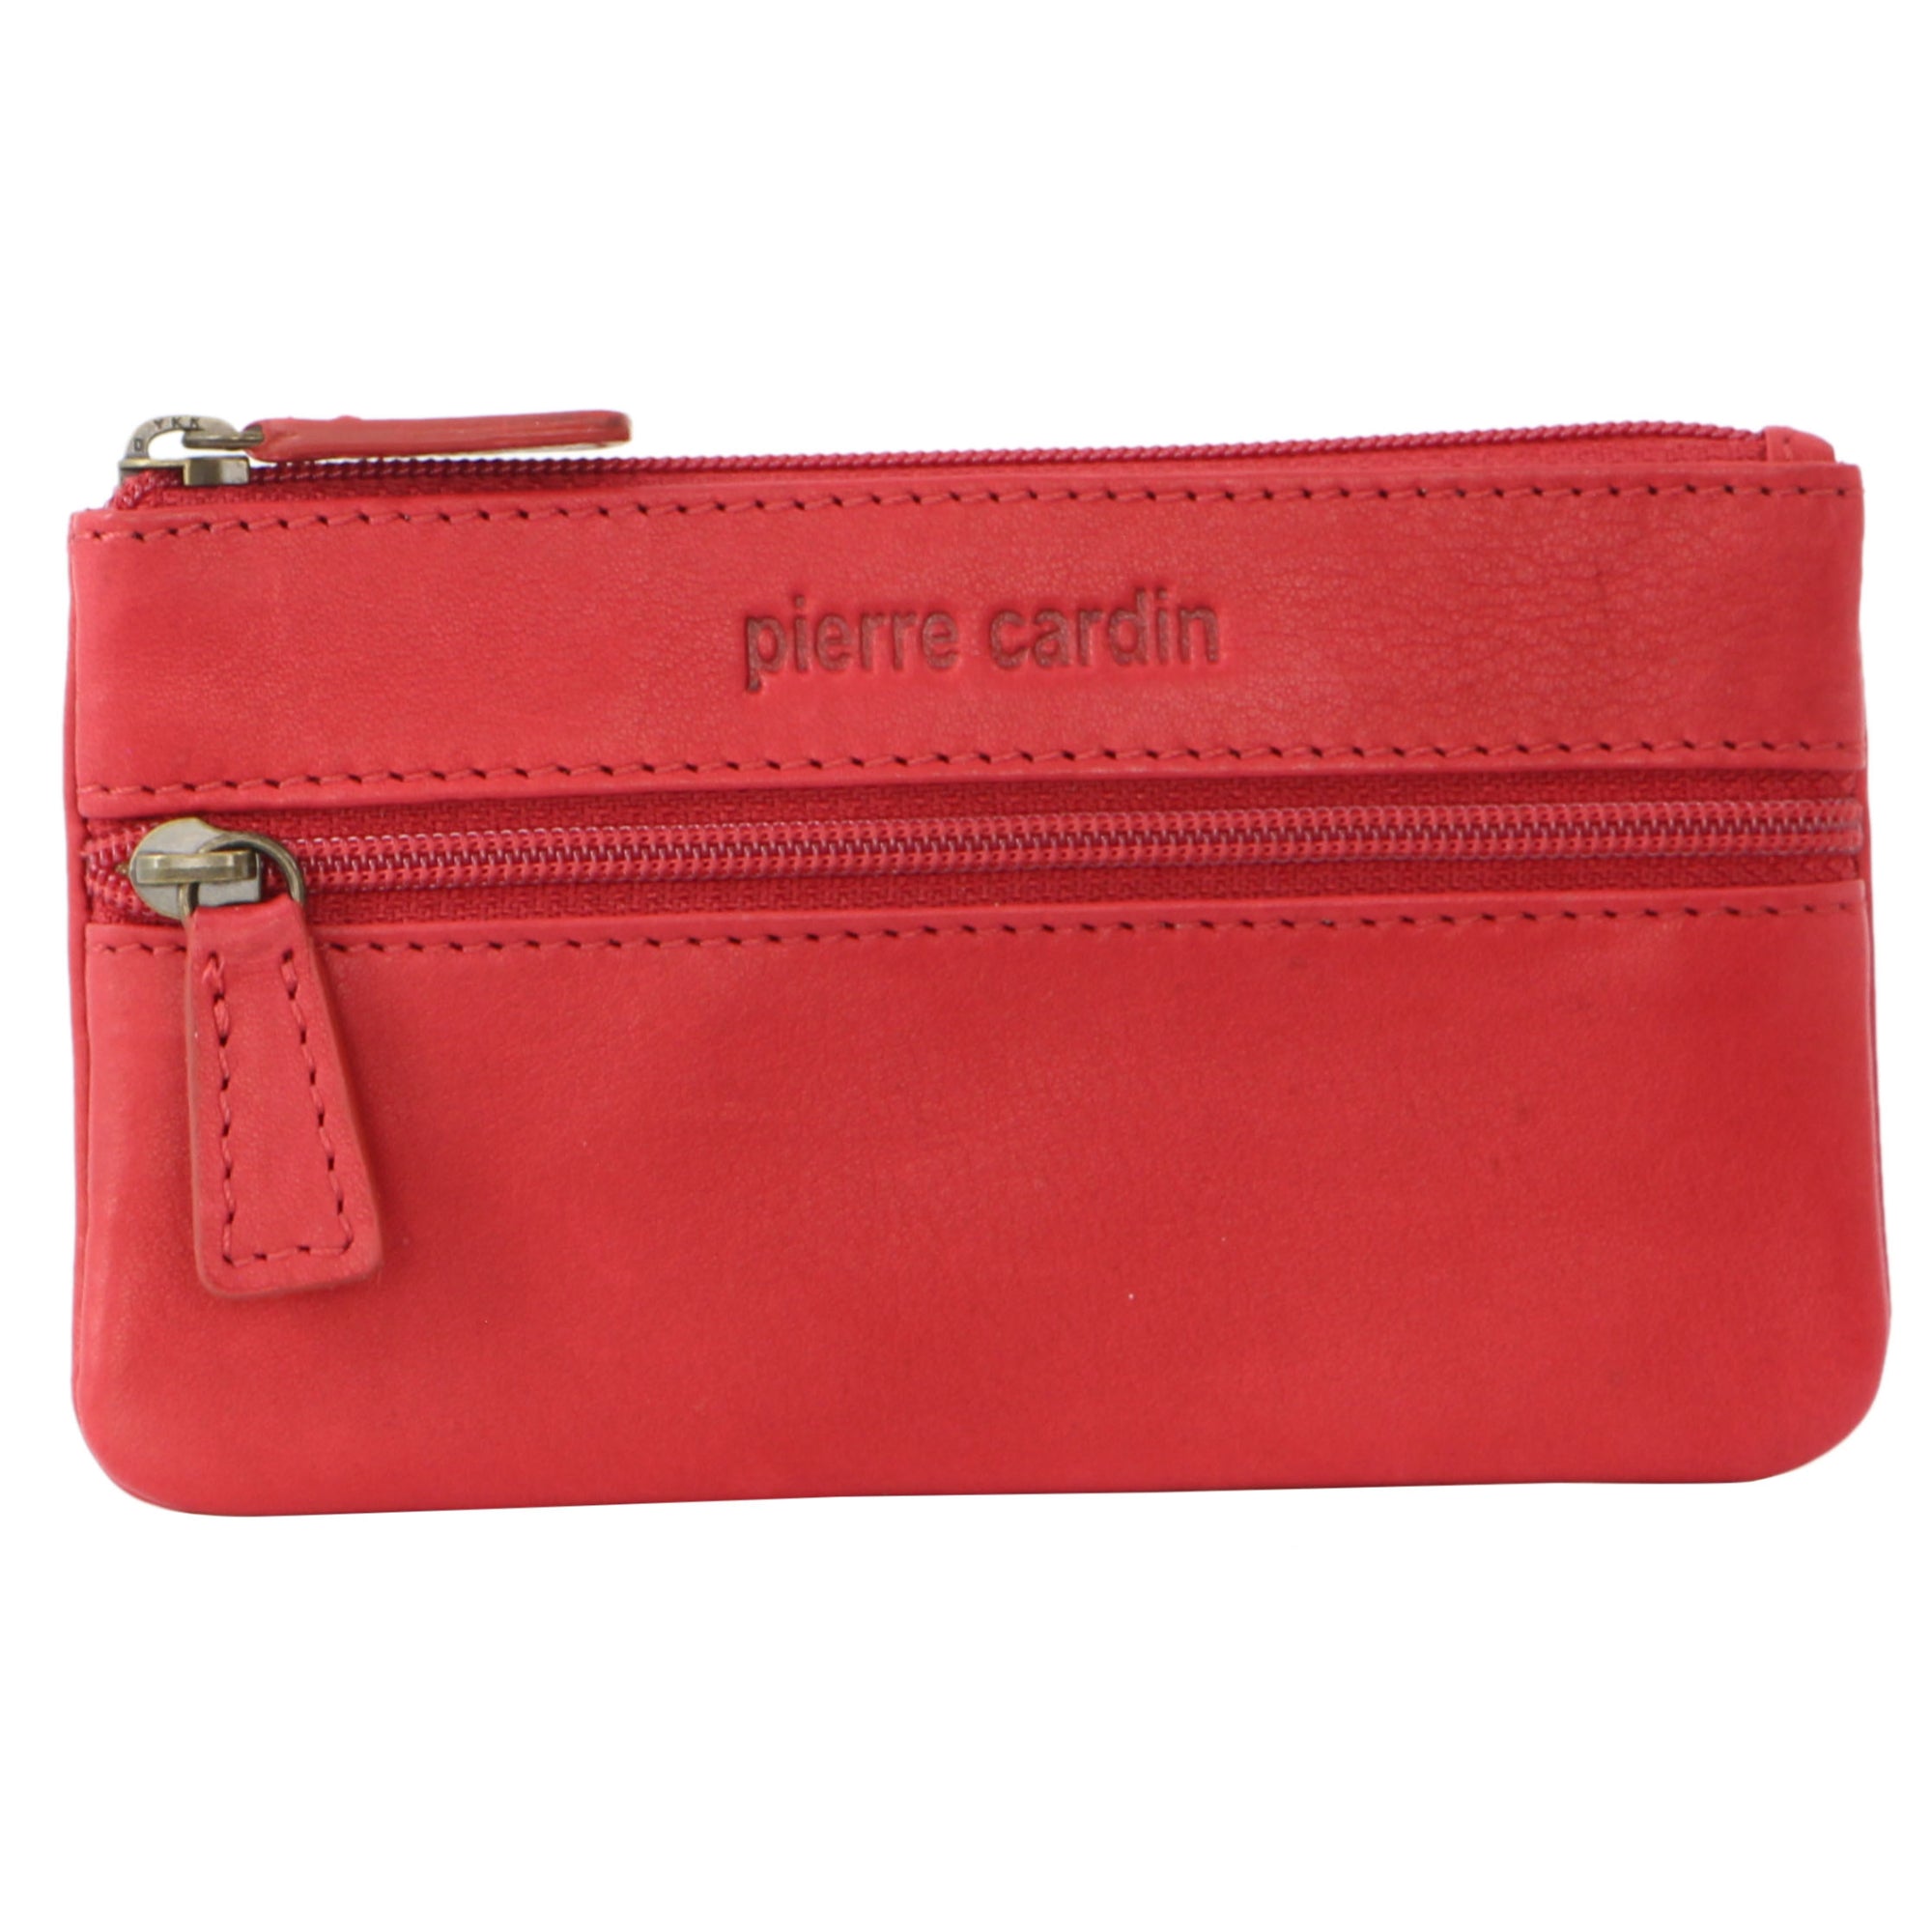 Pierre Cardin Leather Coin Purse/Key Holder in Pink